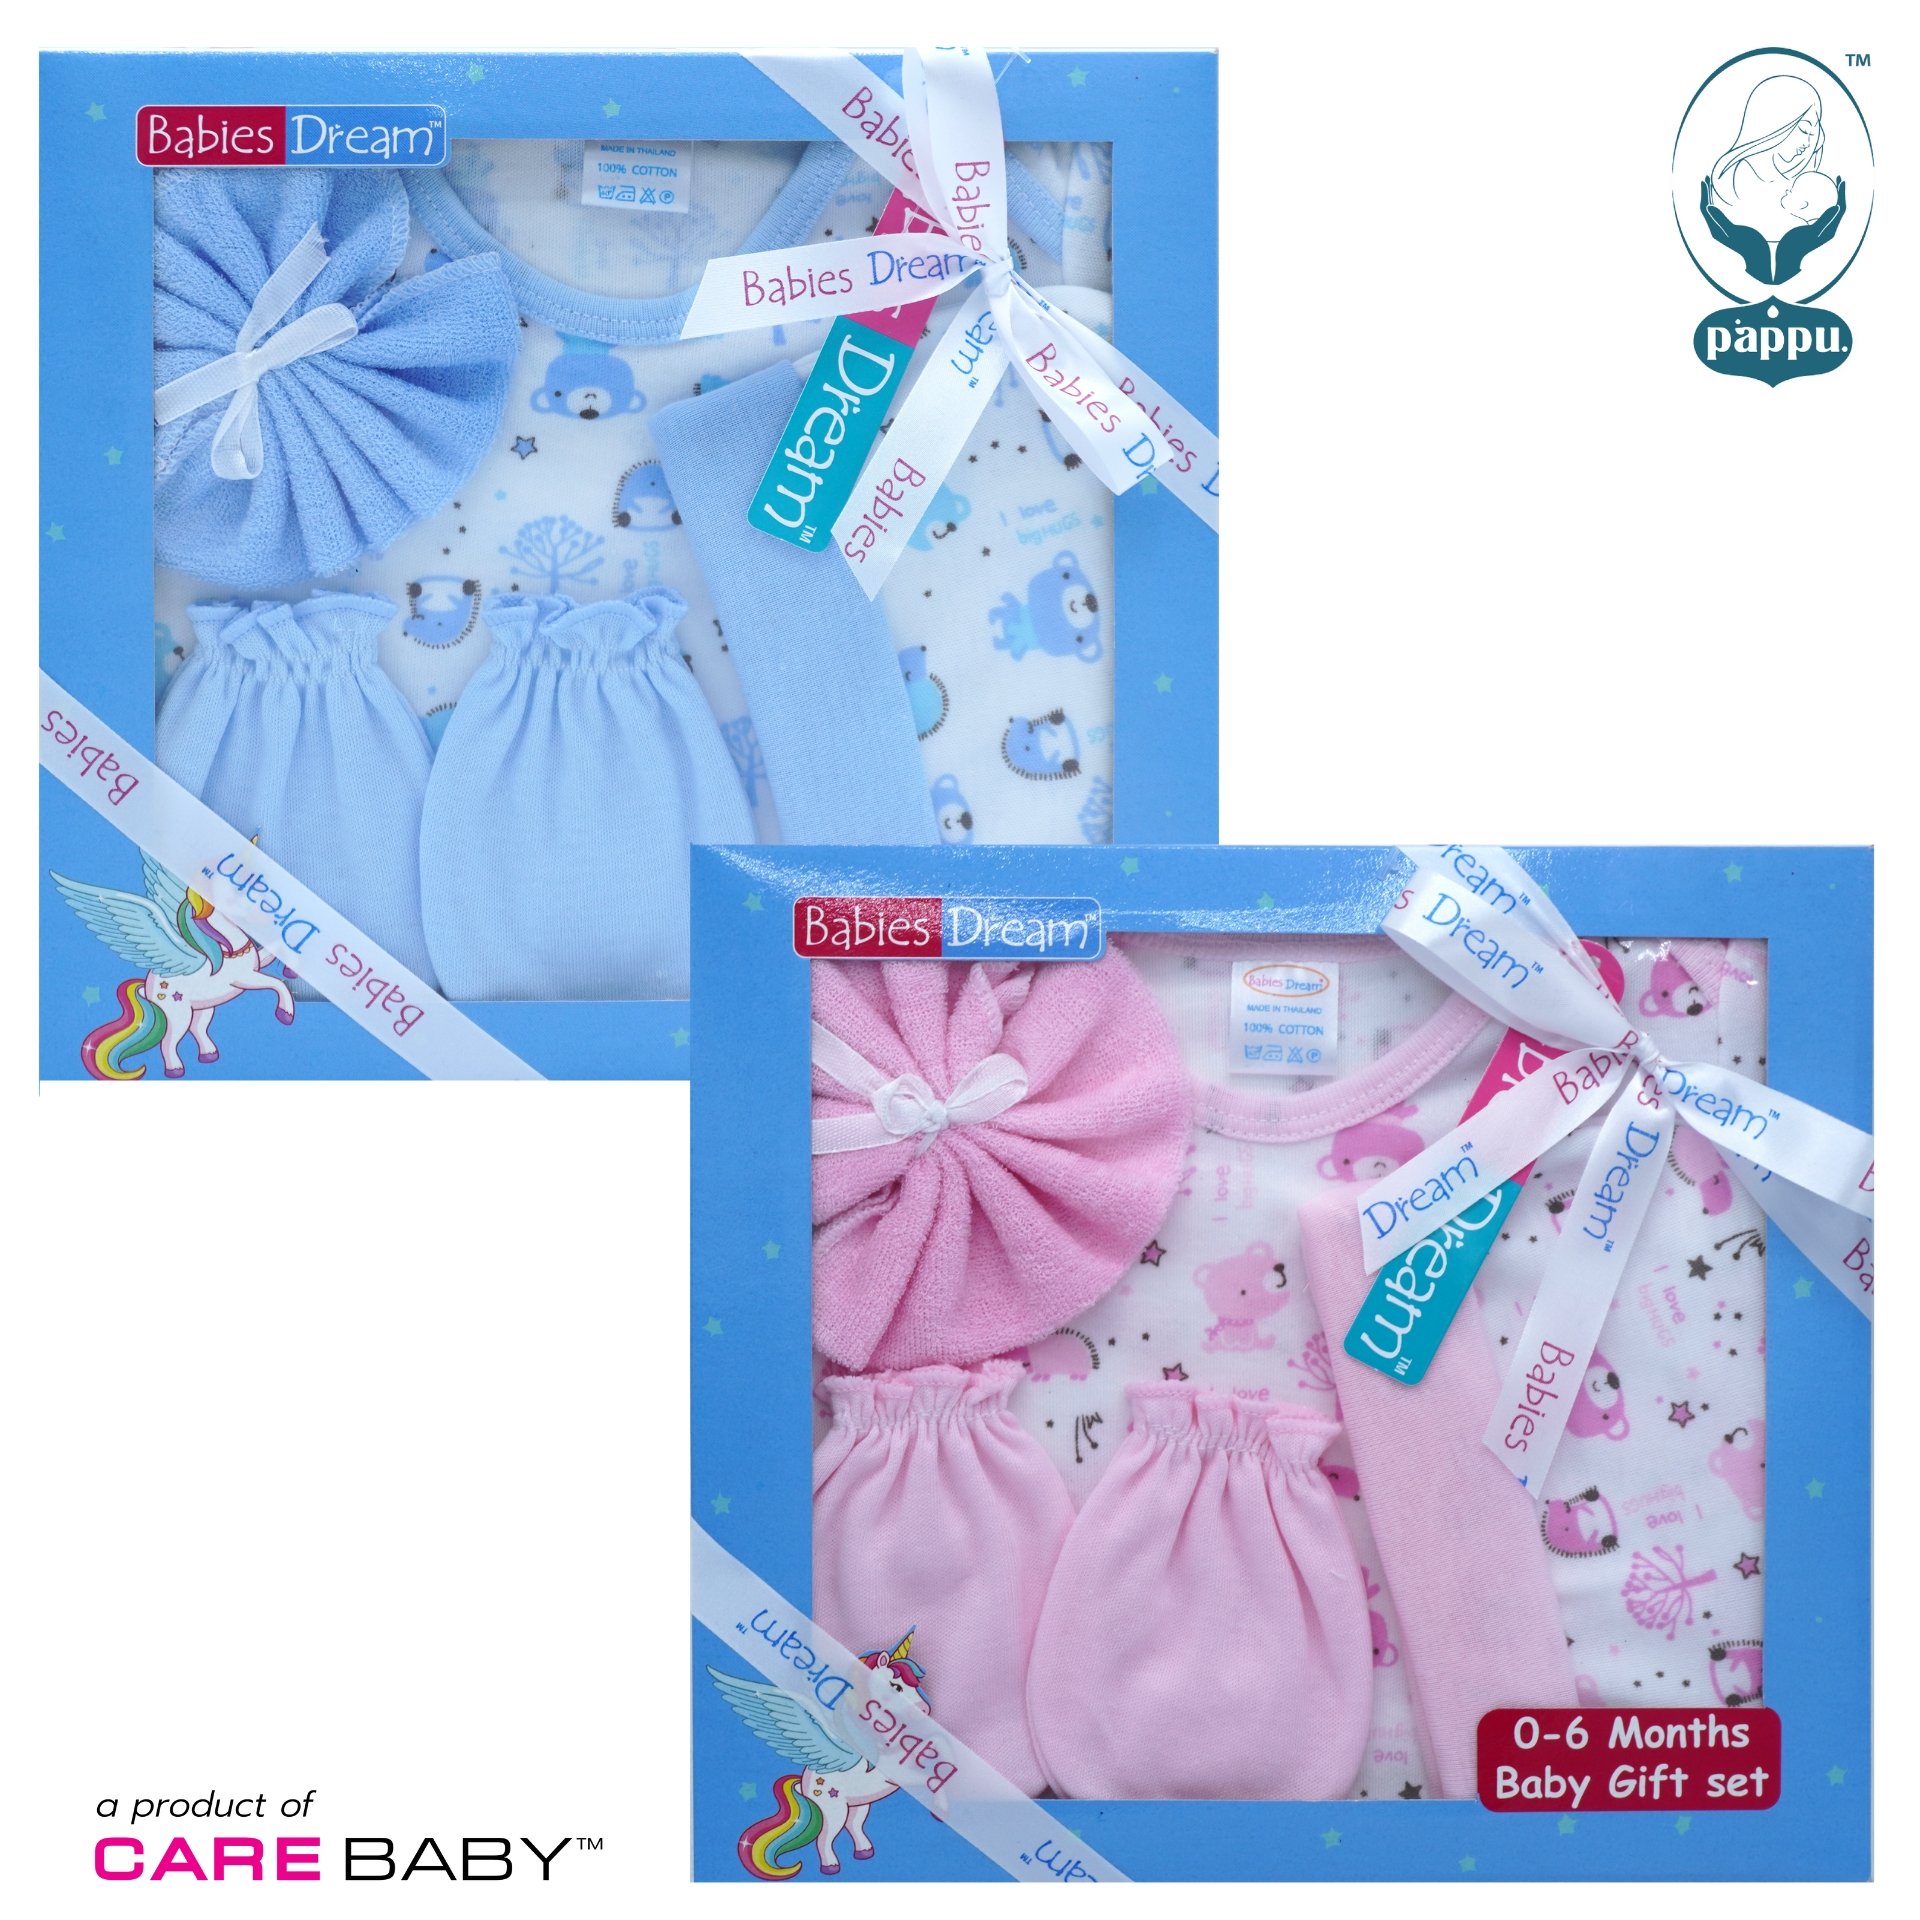 4 Pieces gift set for new born